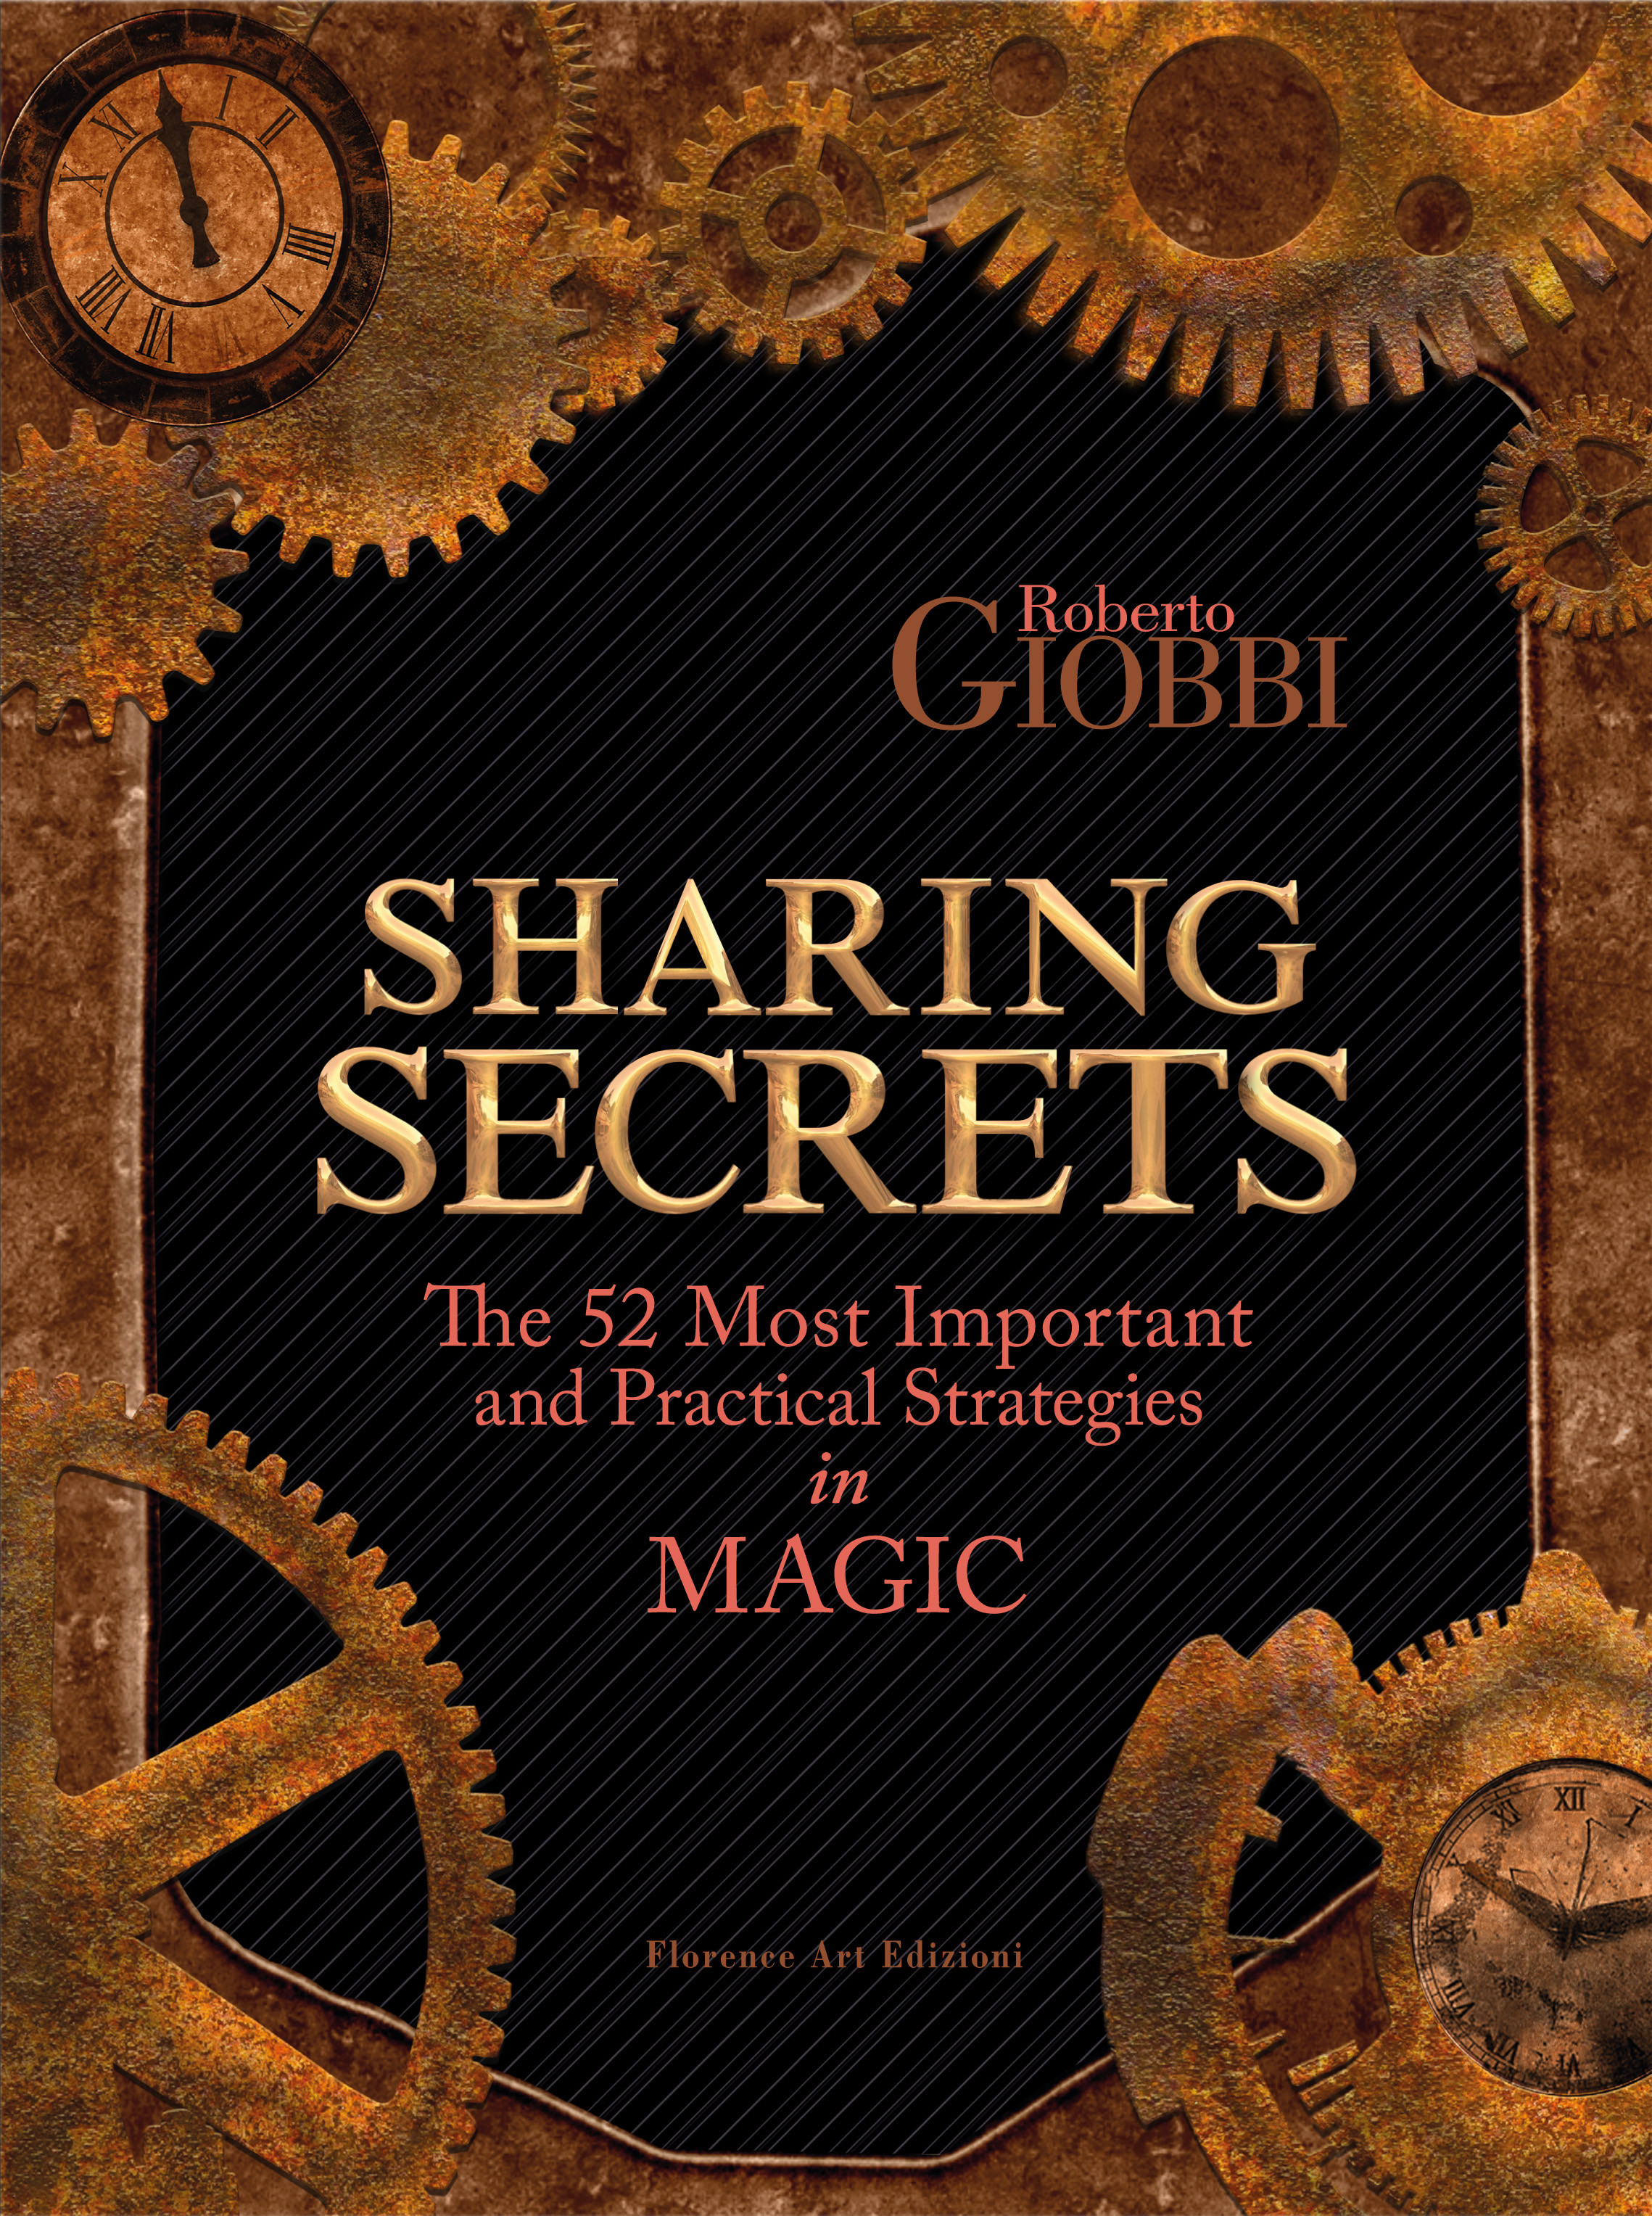 Sharing Secrets - The 52 Most Important and Practical Strategies in Magic by Roberto Giobbi